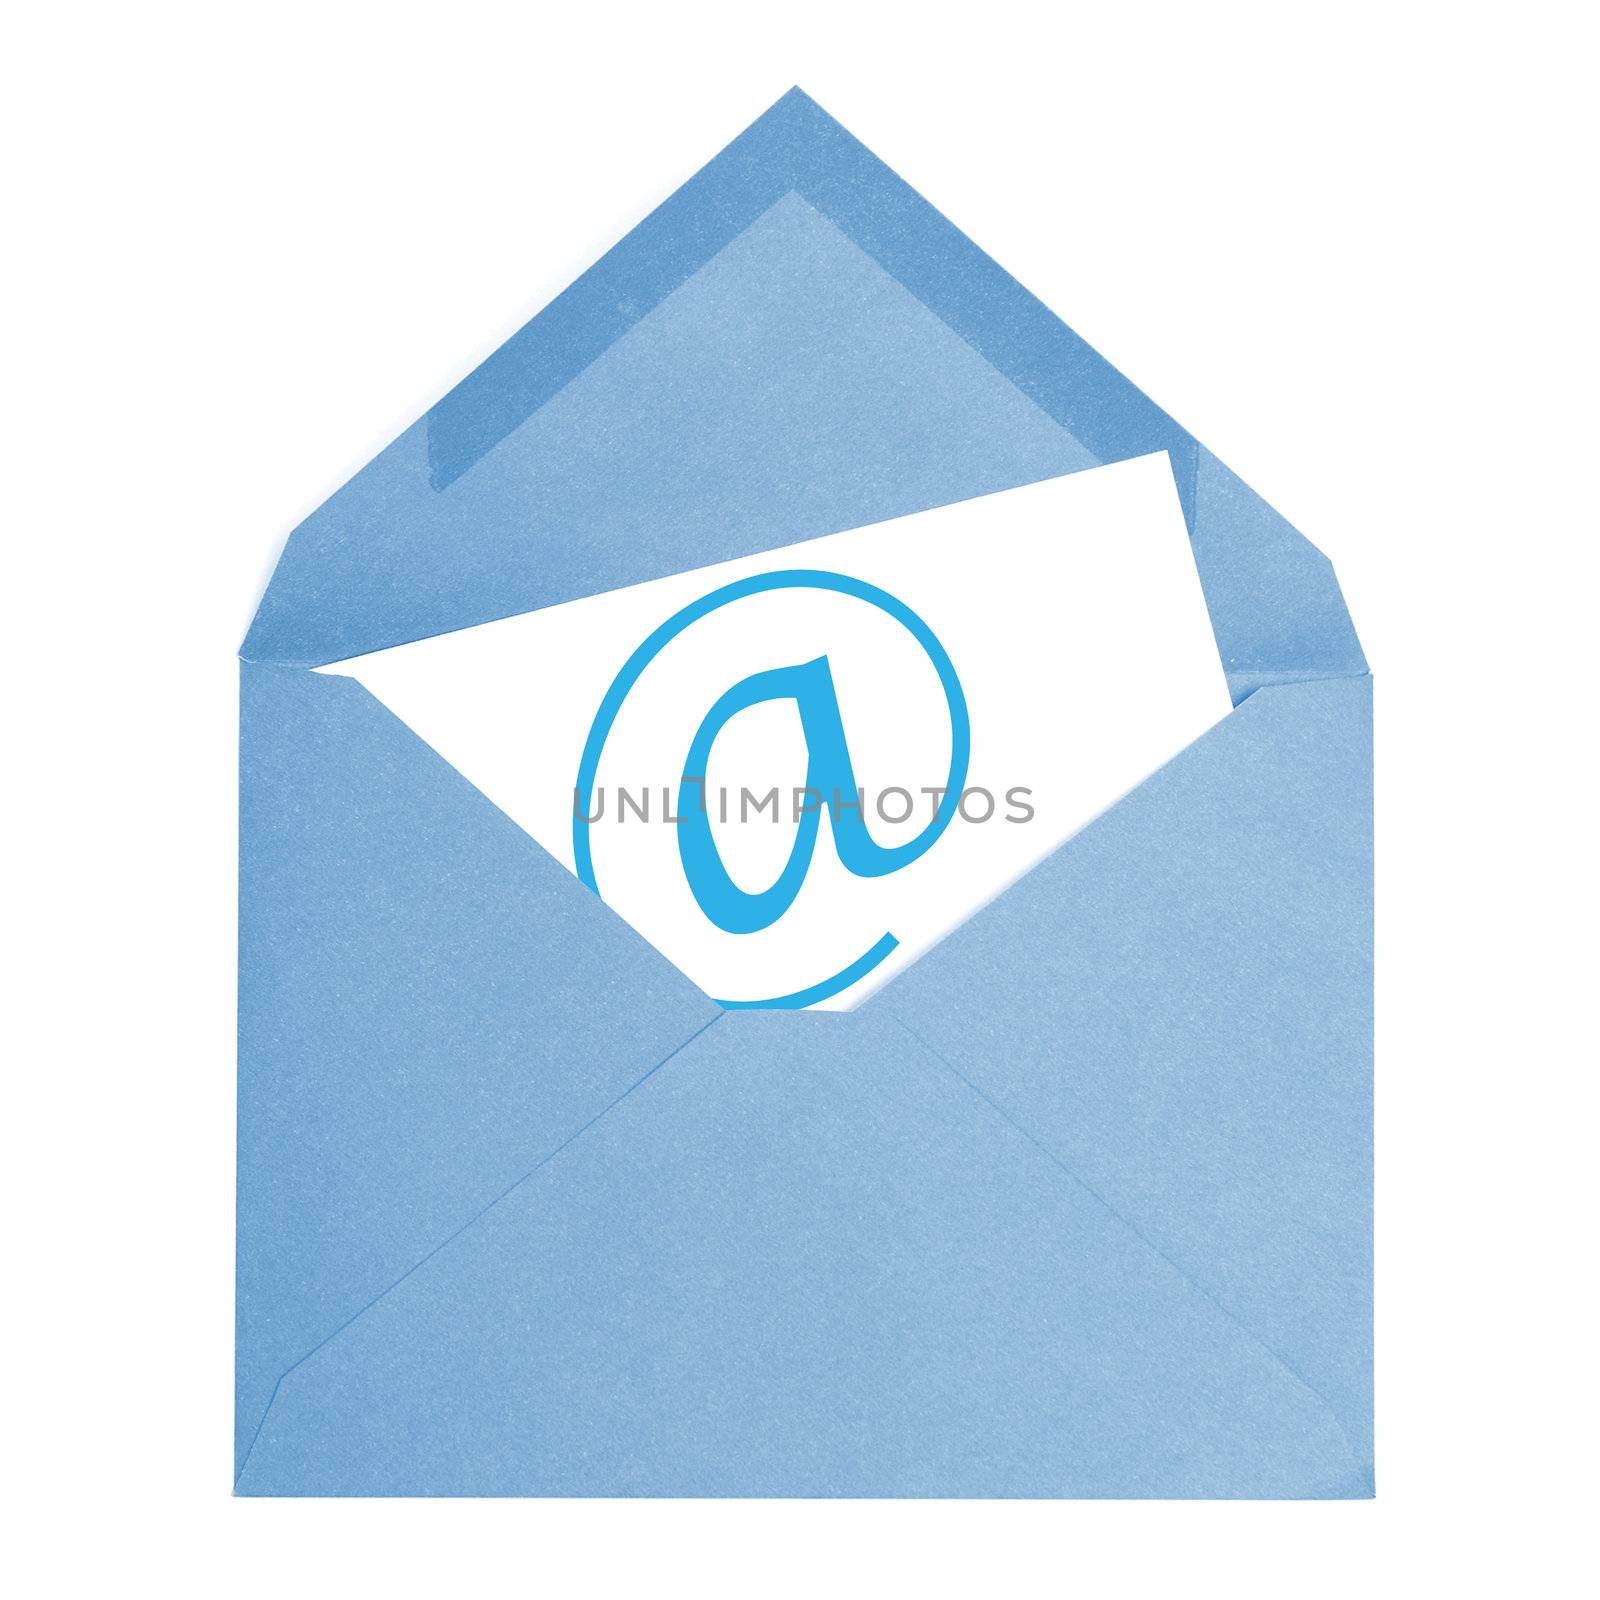 A blue email envelope is isolated on a white background.